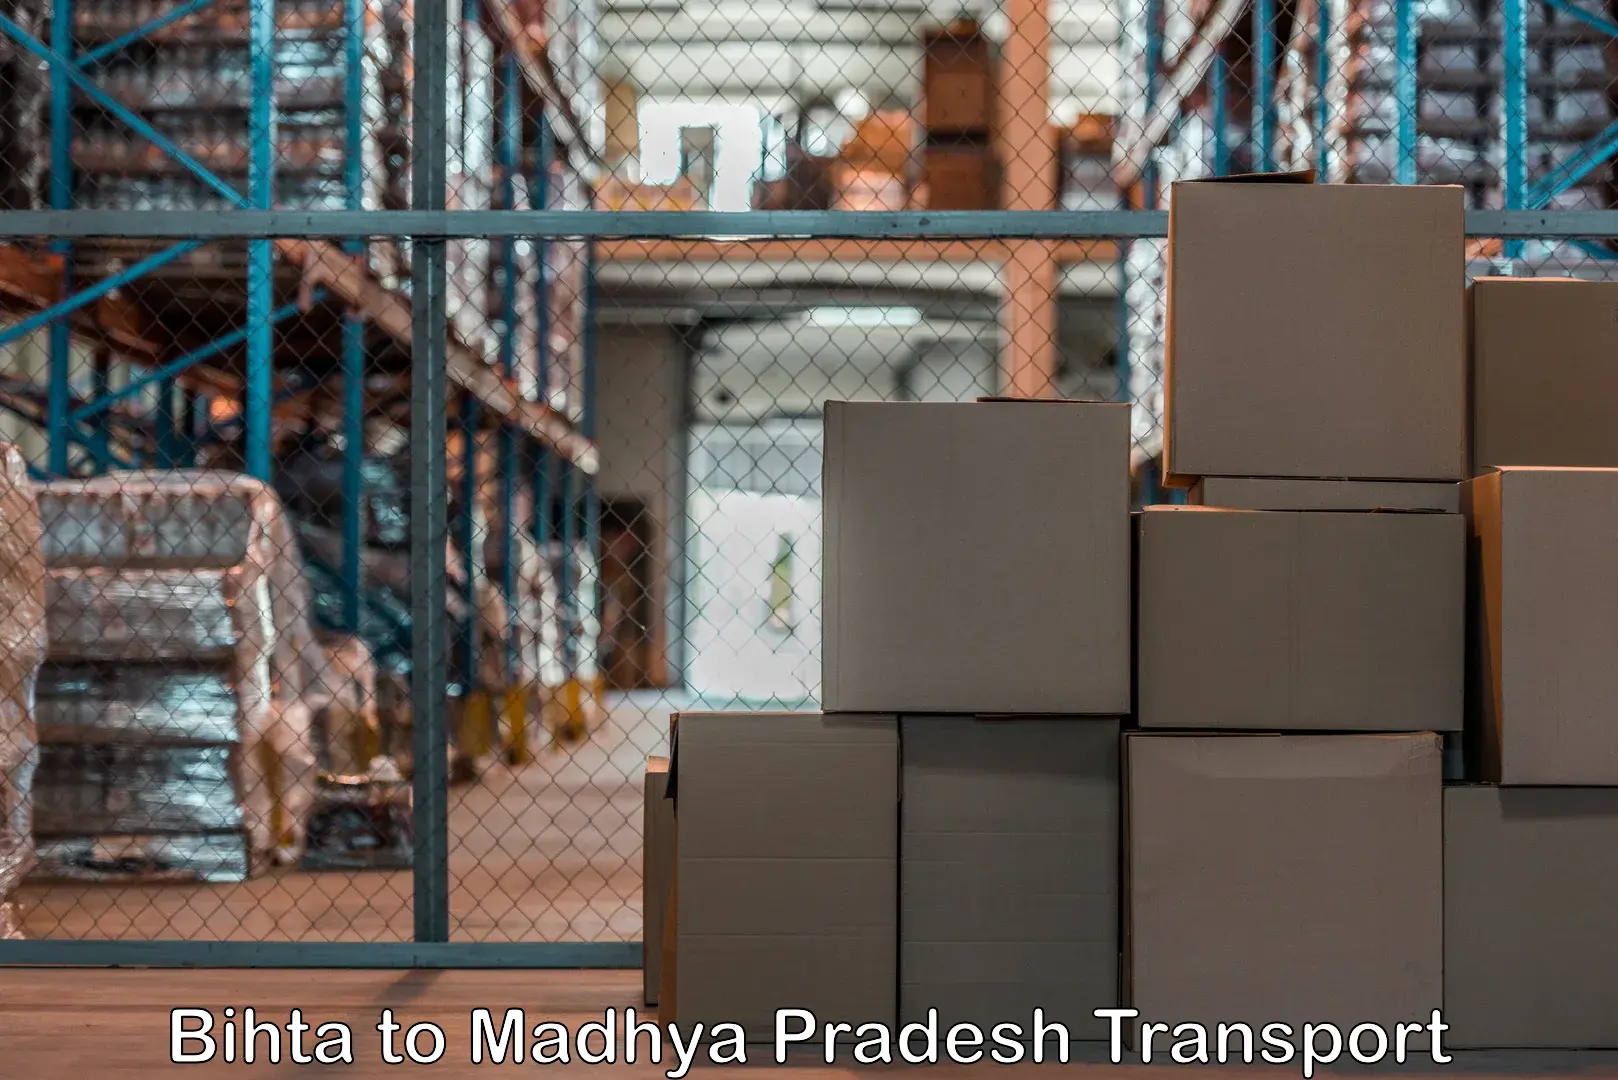 Daily parcel service transport Bihta to Gotegaon